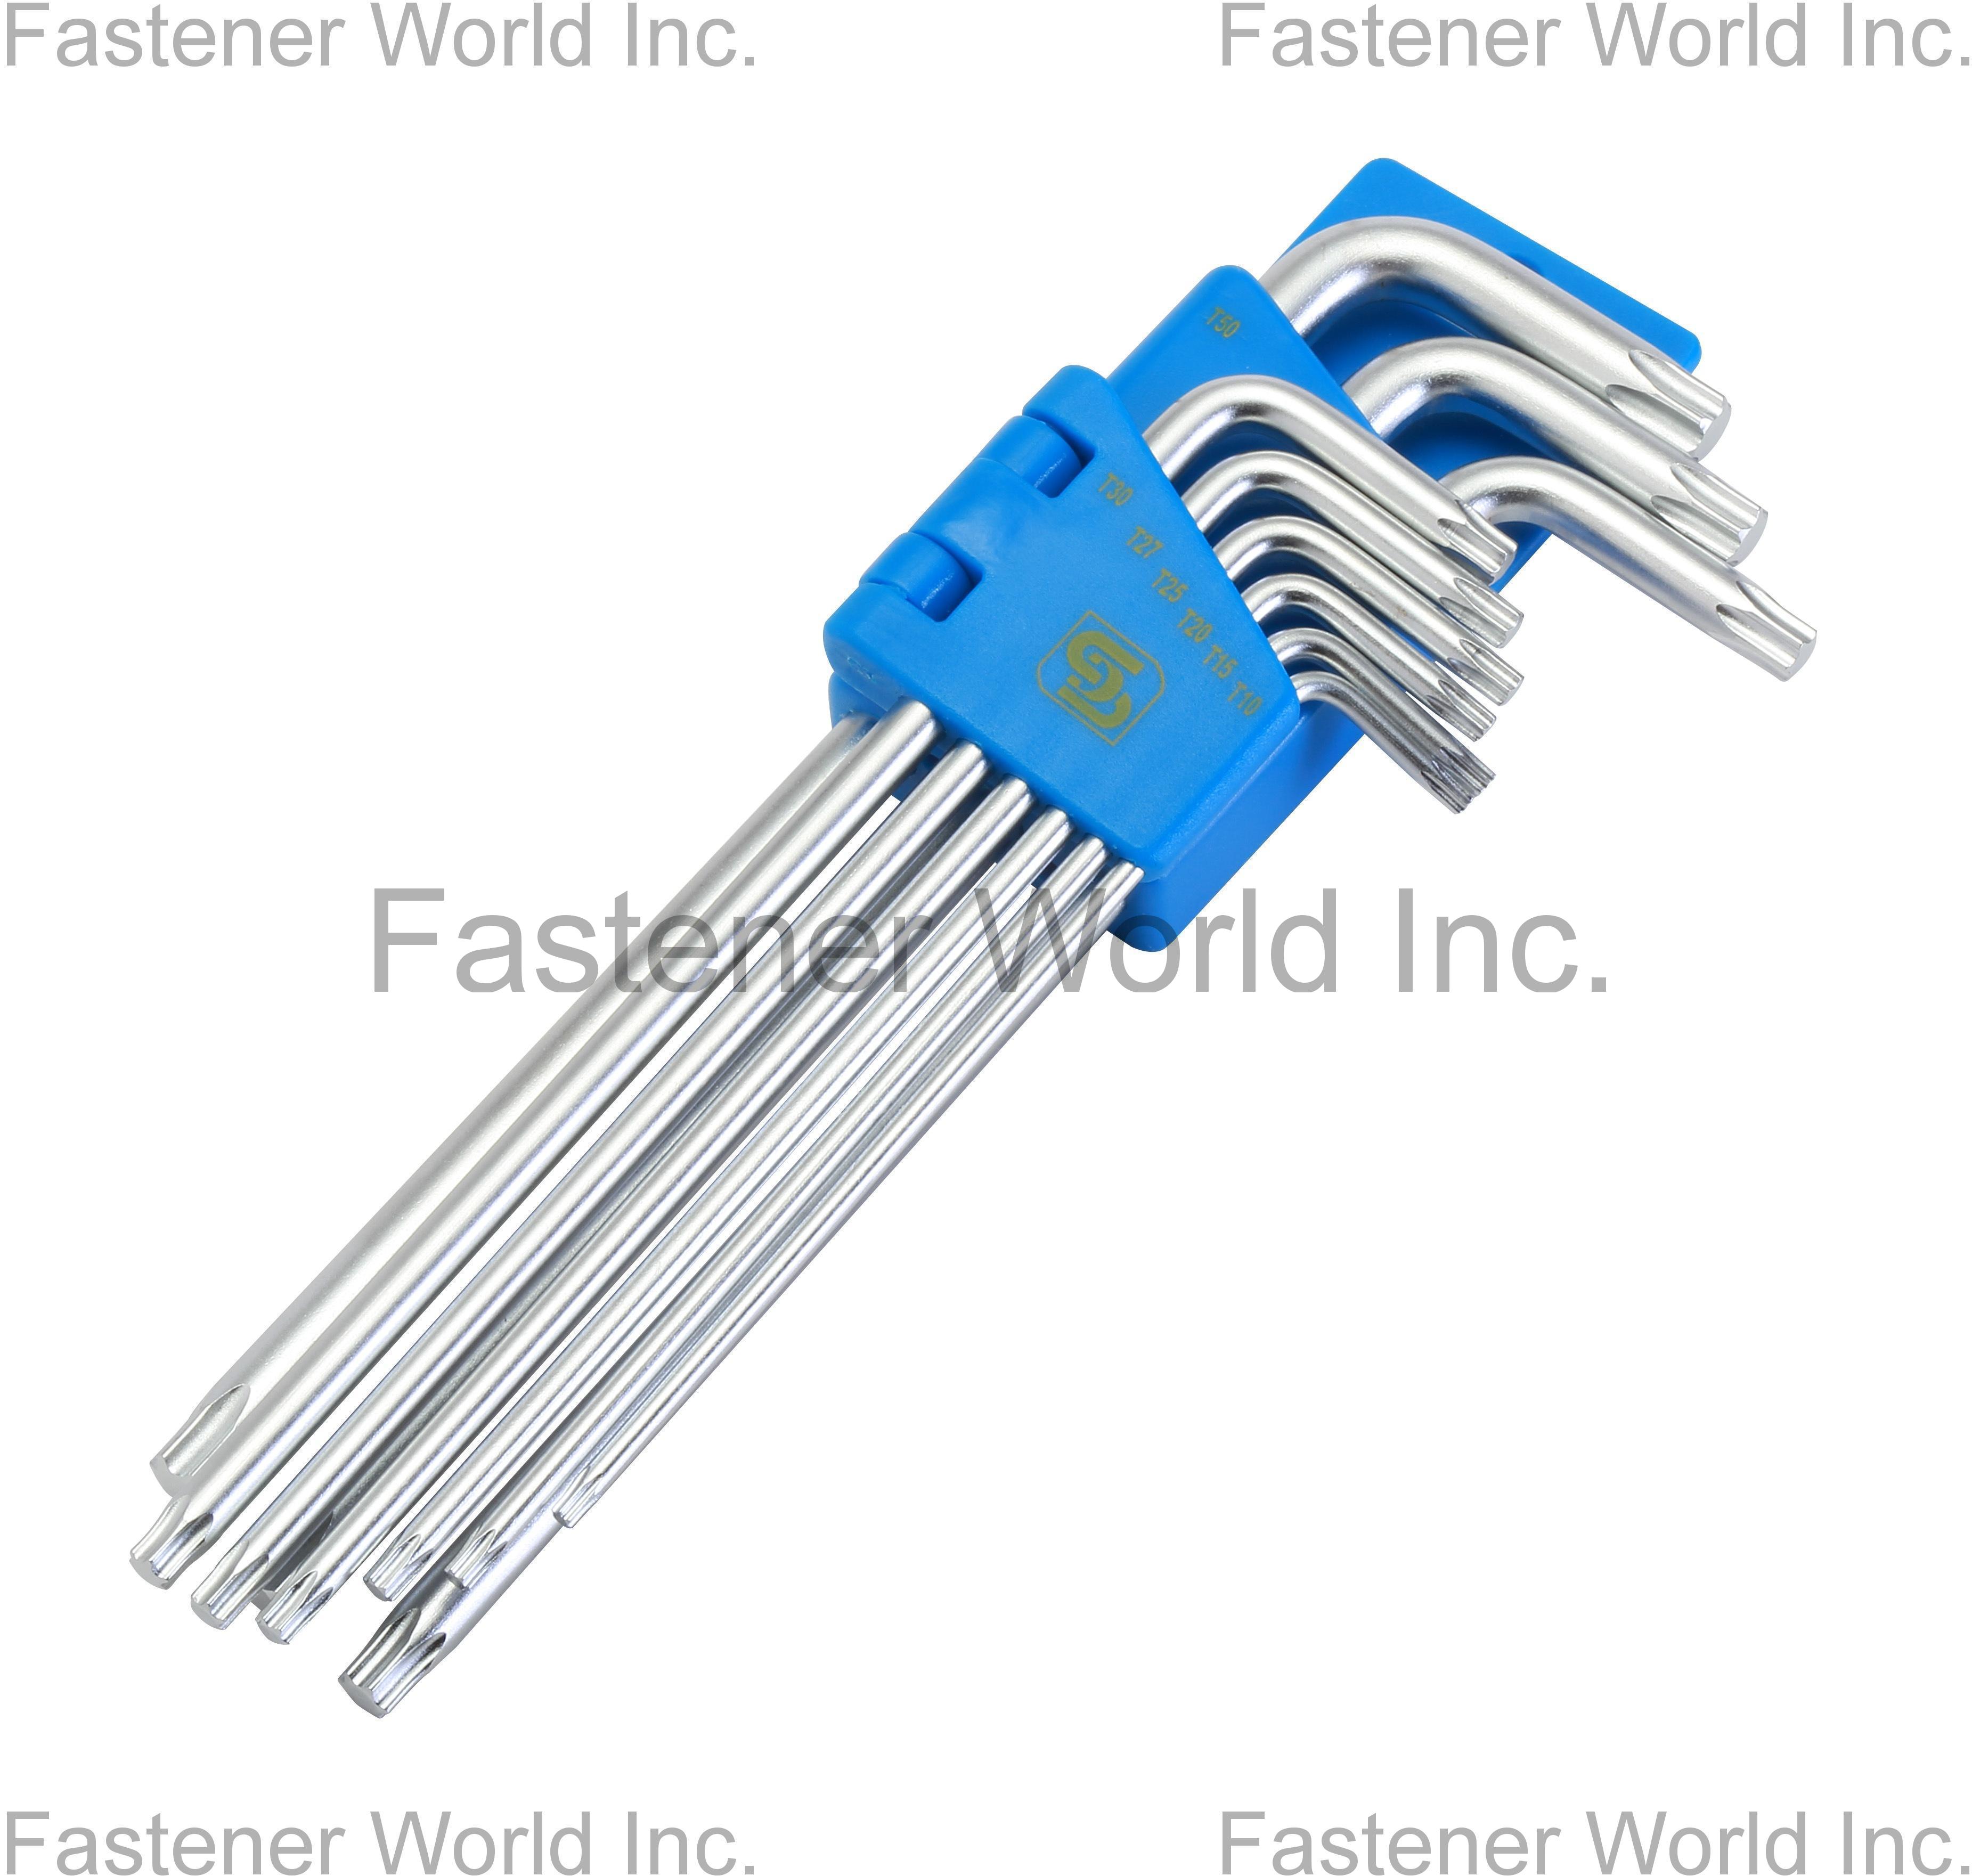 SHUN DEN IRON WORKS CO., LTD.  , TORX HEX KEY WRENCH WITH EXTRA LONG ARM , Hex-key Wrenches